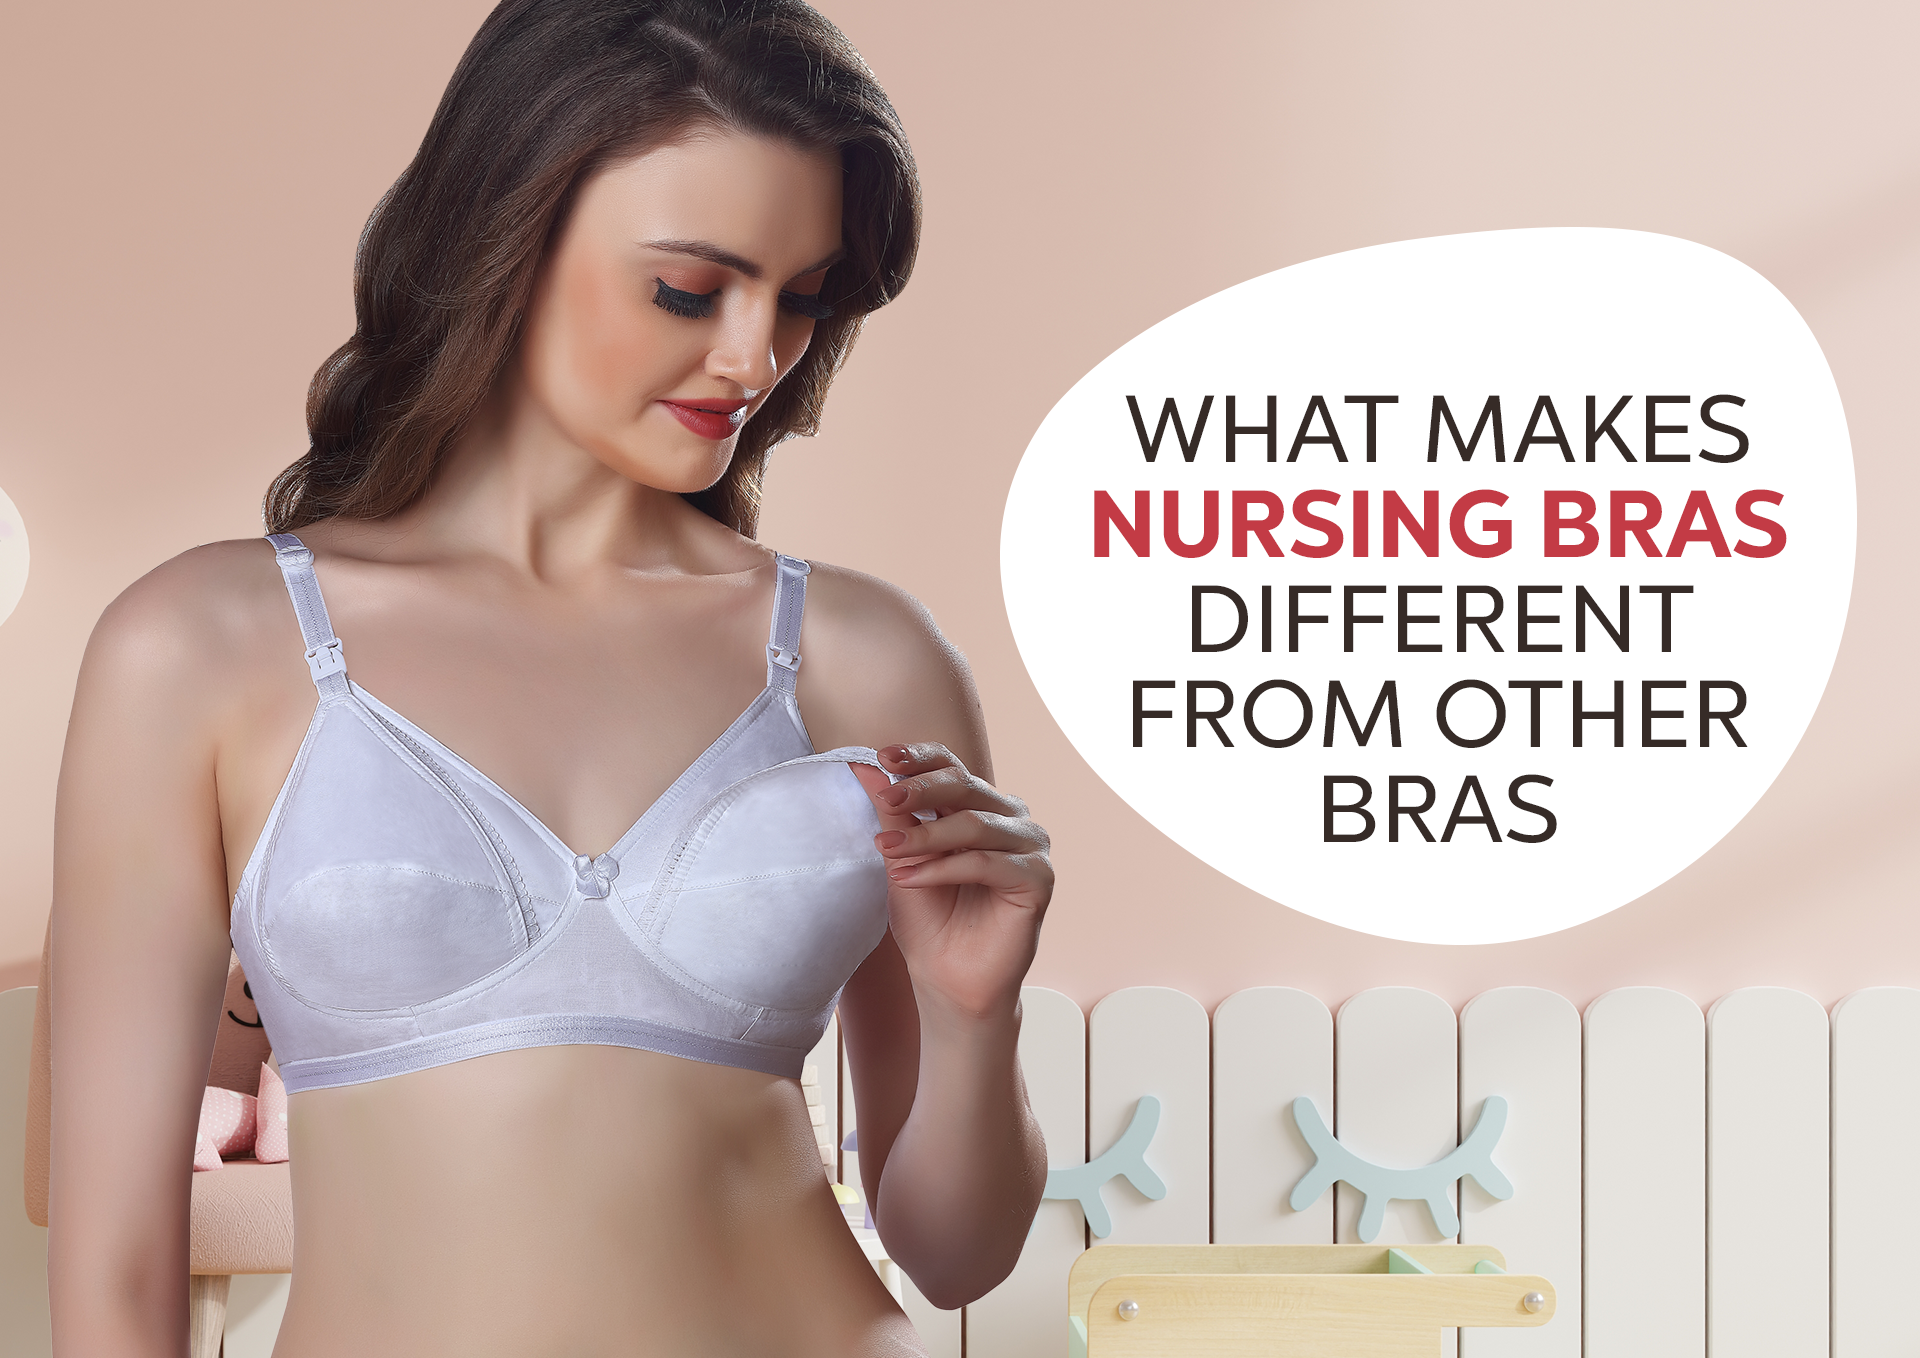 What Makes Nursing Bras Different from Other Bras